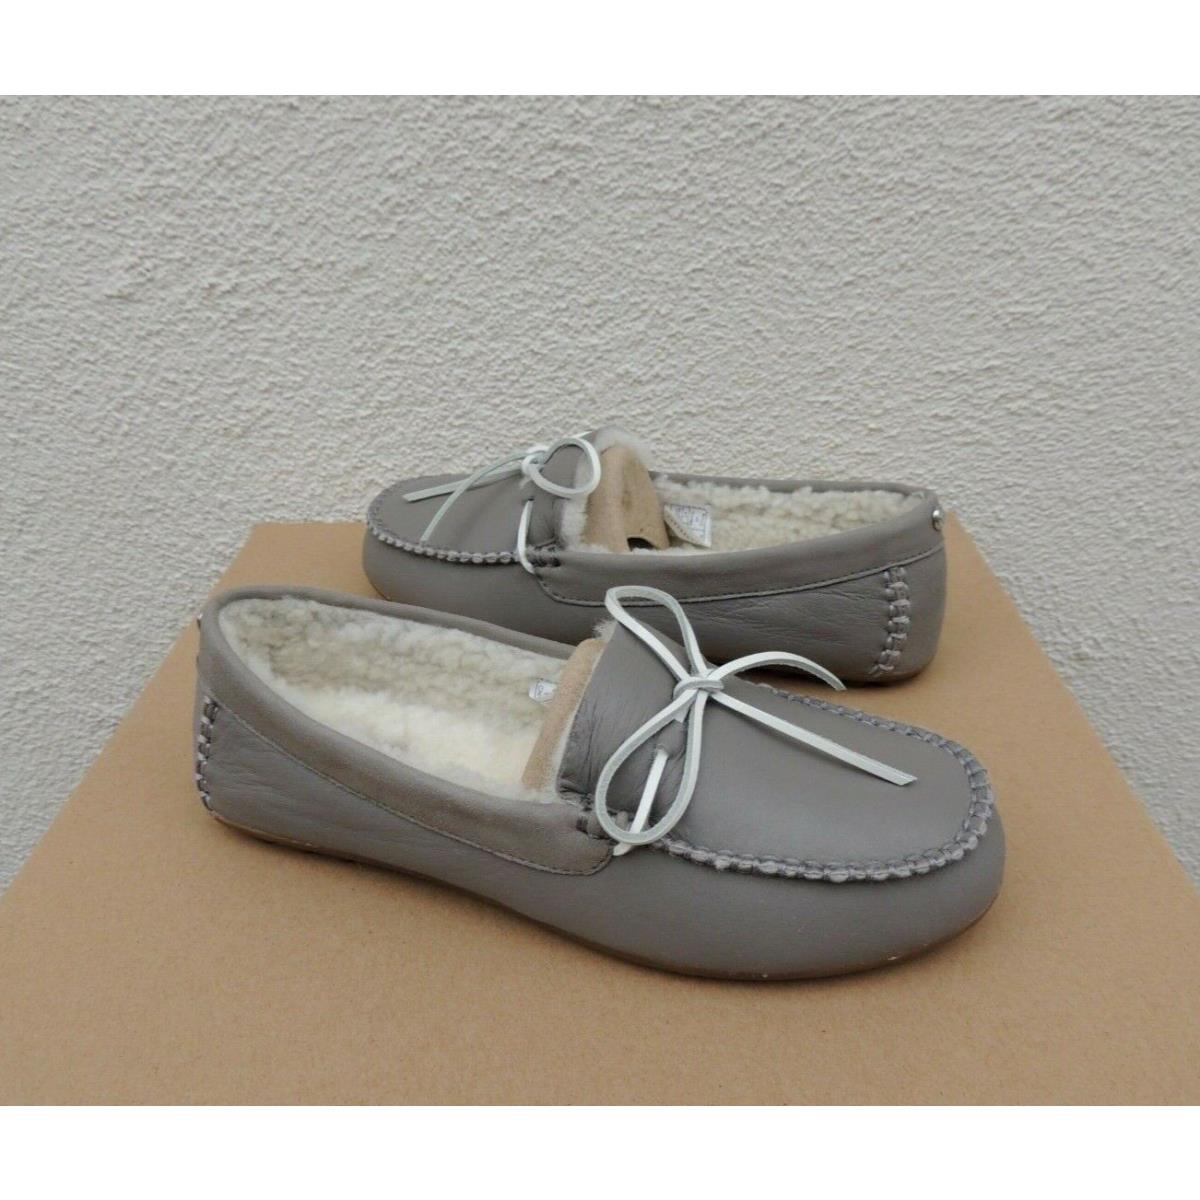 Ugg Seal Grey Deluxe Leather Sheepskin Moccasin Loafers Women US 8/ Eur 39